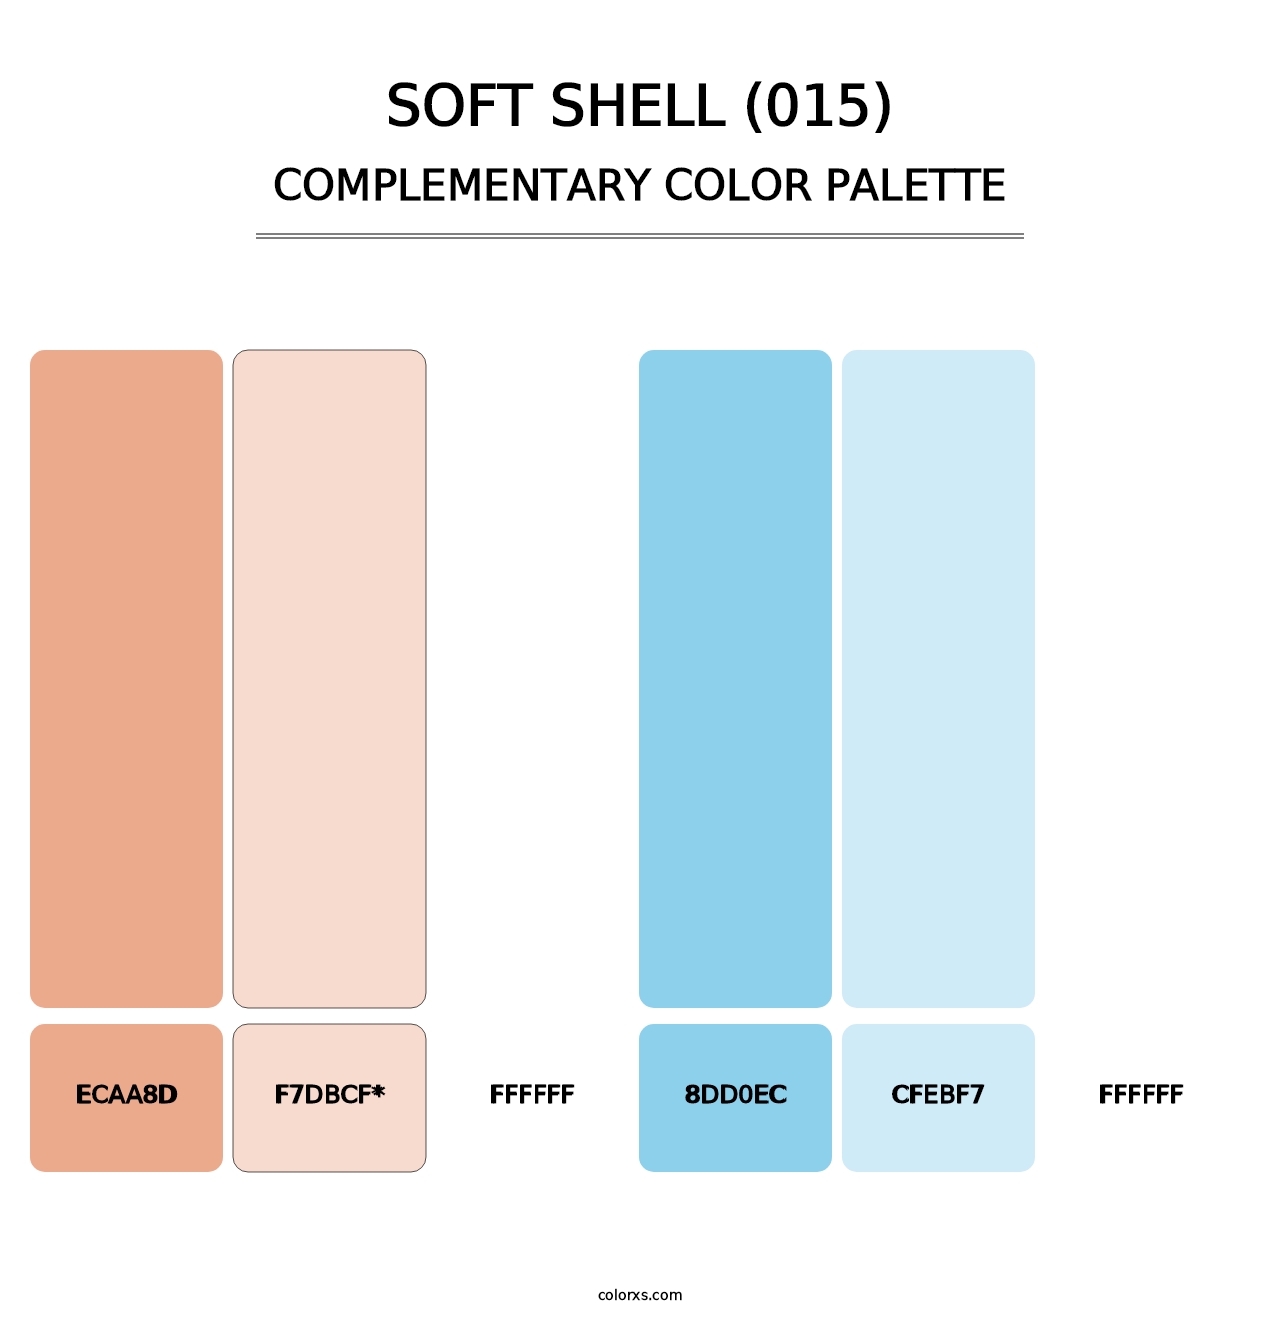 Soft Shell (015) - Complementary Color Palette